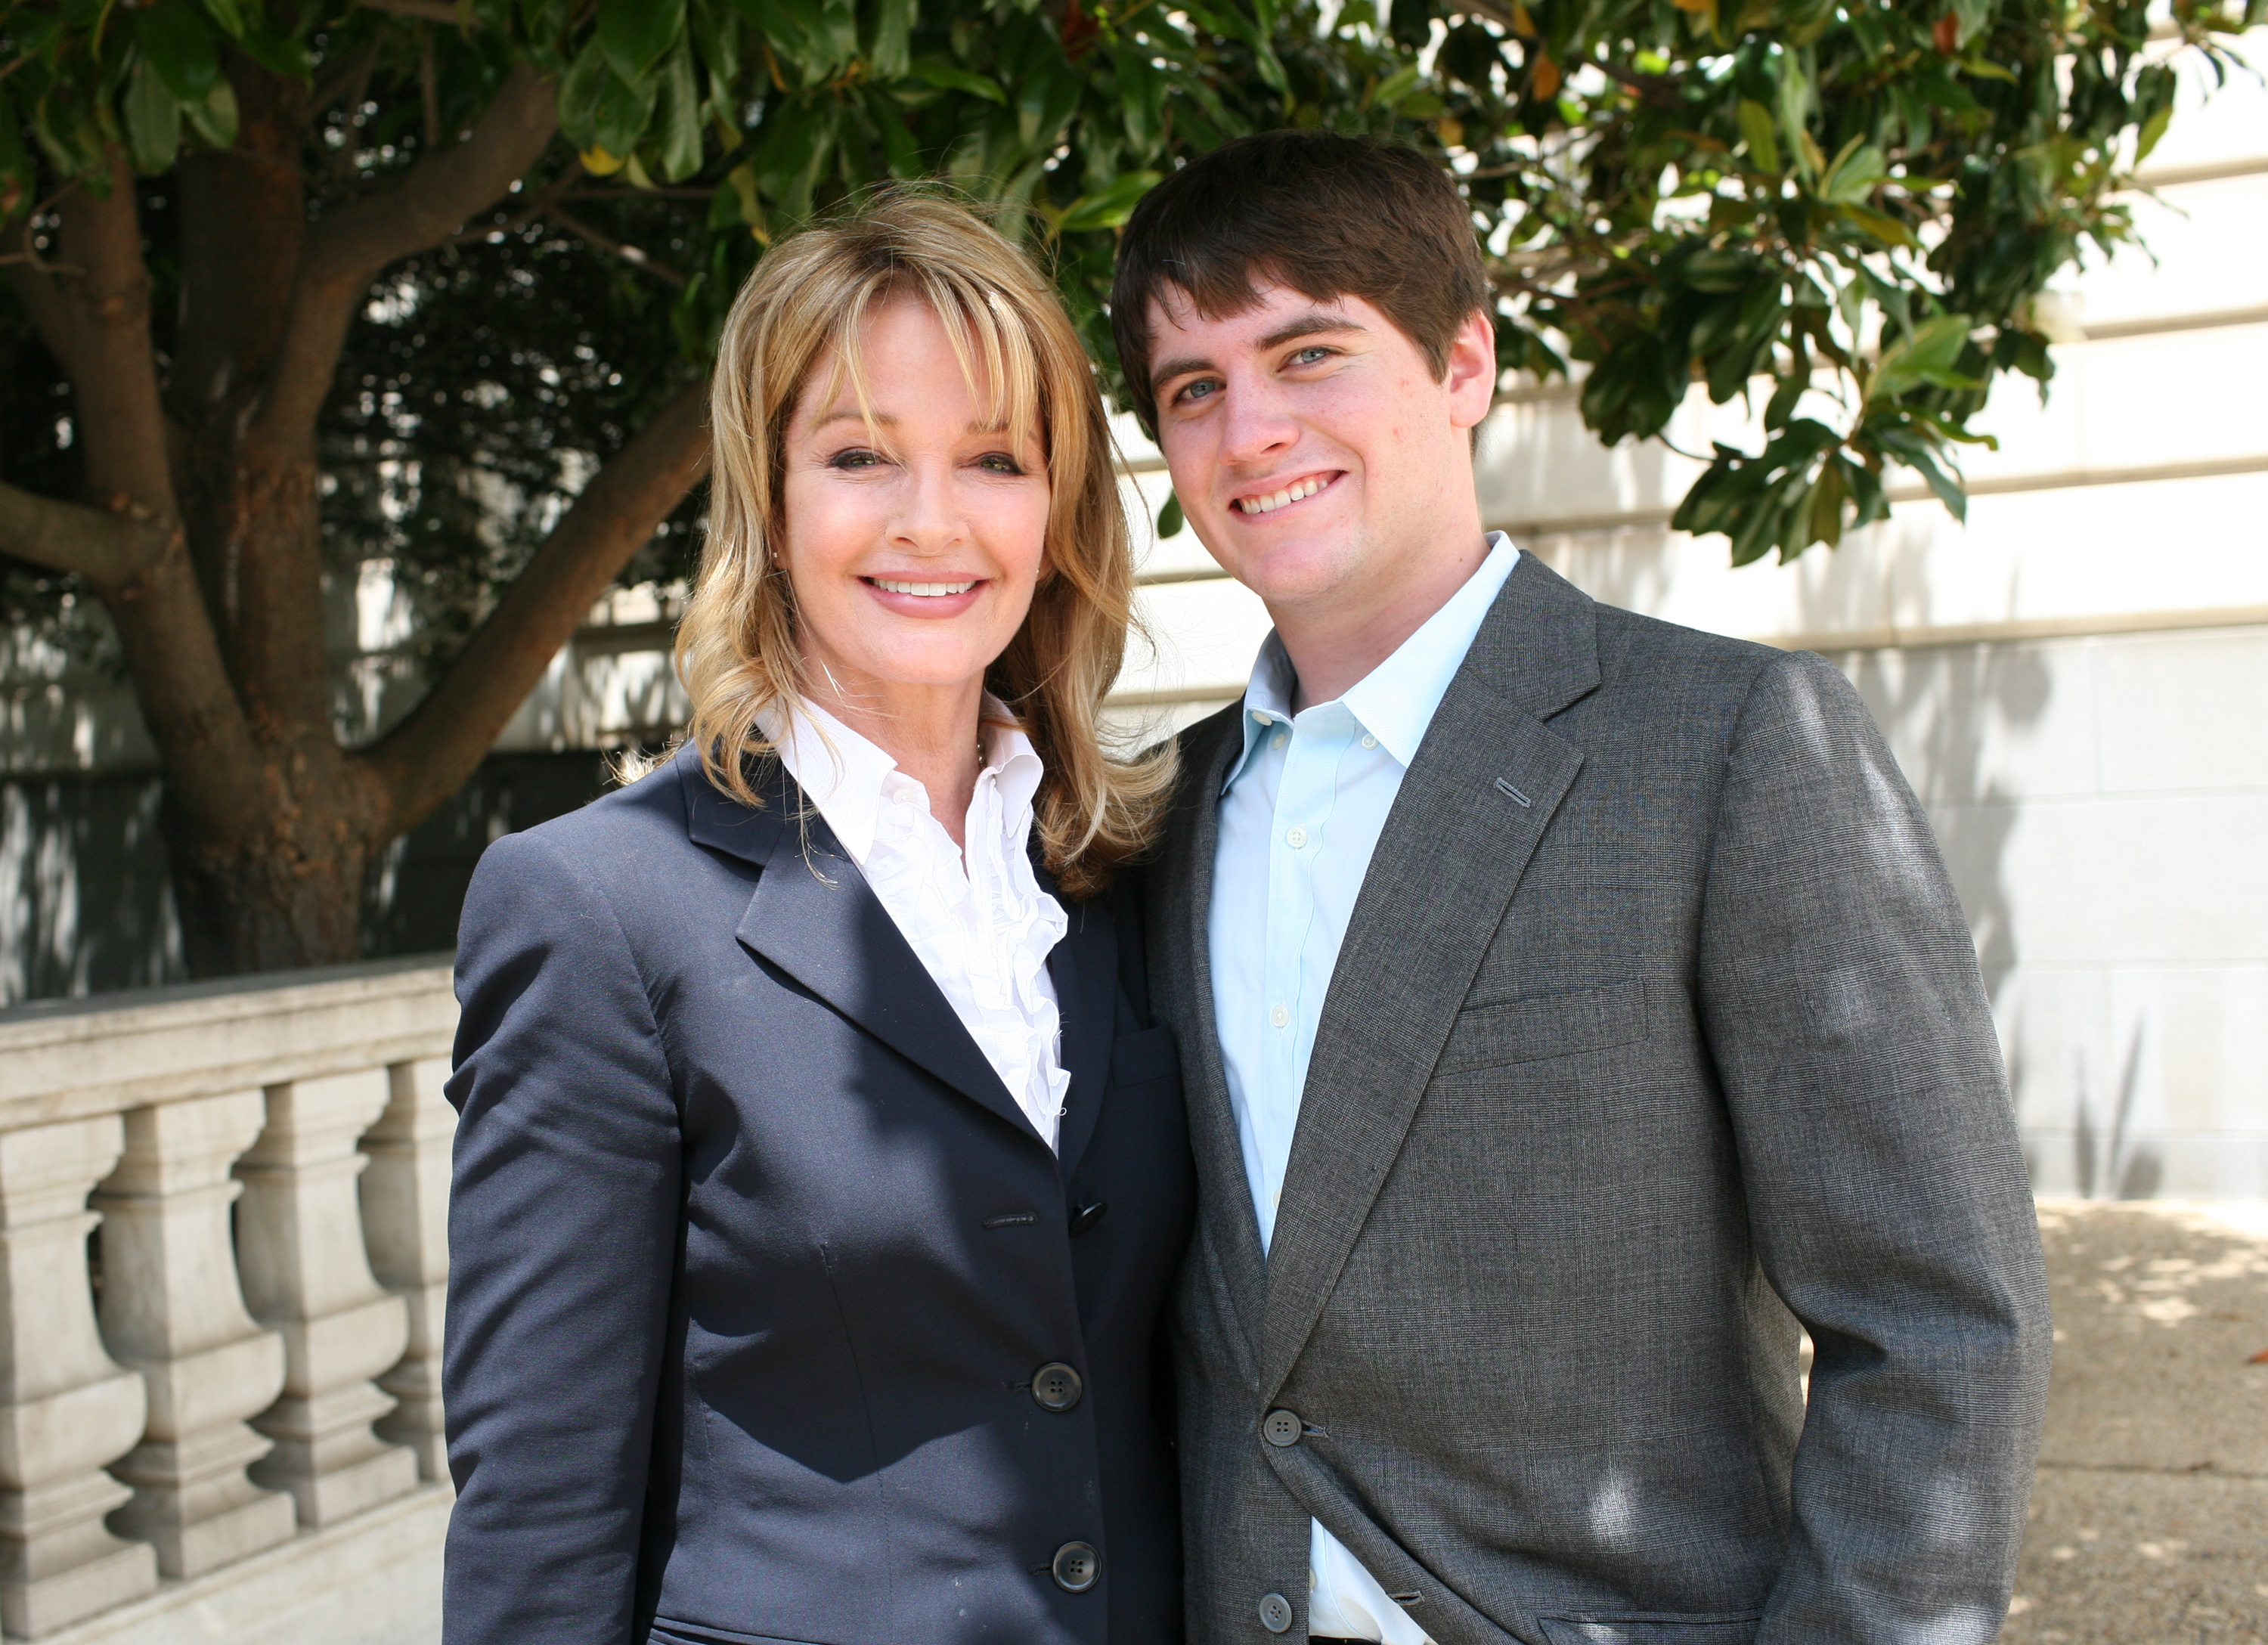 Deidre Hall and her 16-year-old son, David Sohmer, at a press conference for the Child Nutrition Promotion and School Lunch Protection Act on June 24, 2009, in Washington, DC. | Source: Getty Images